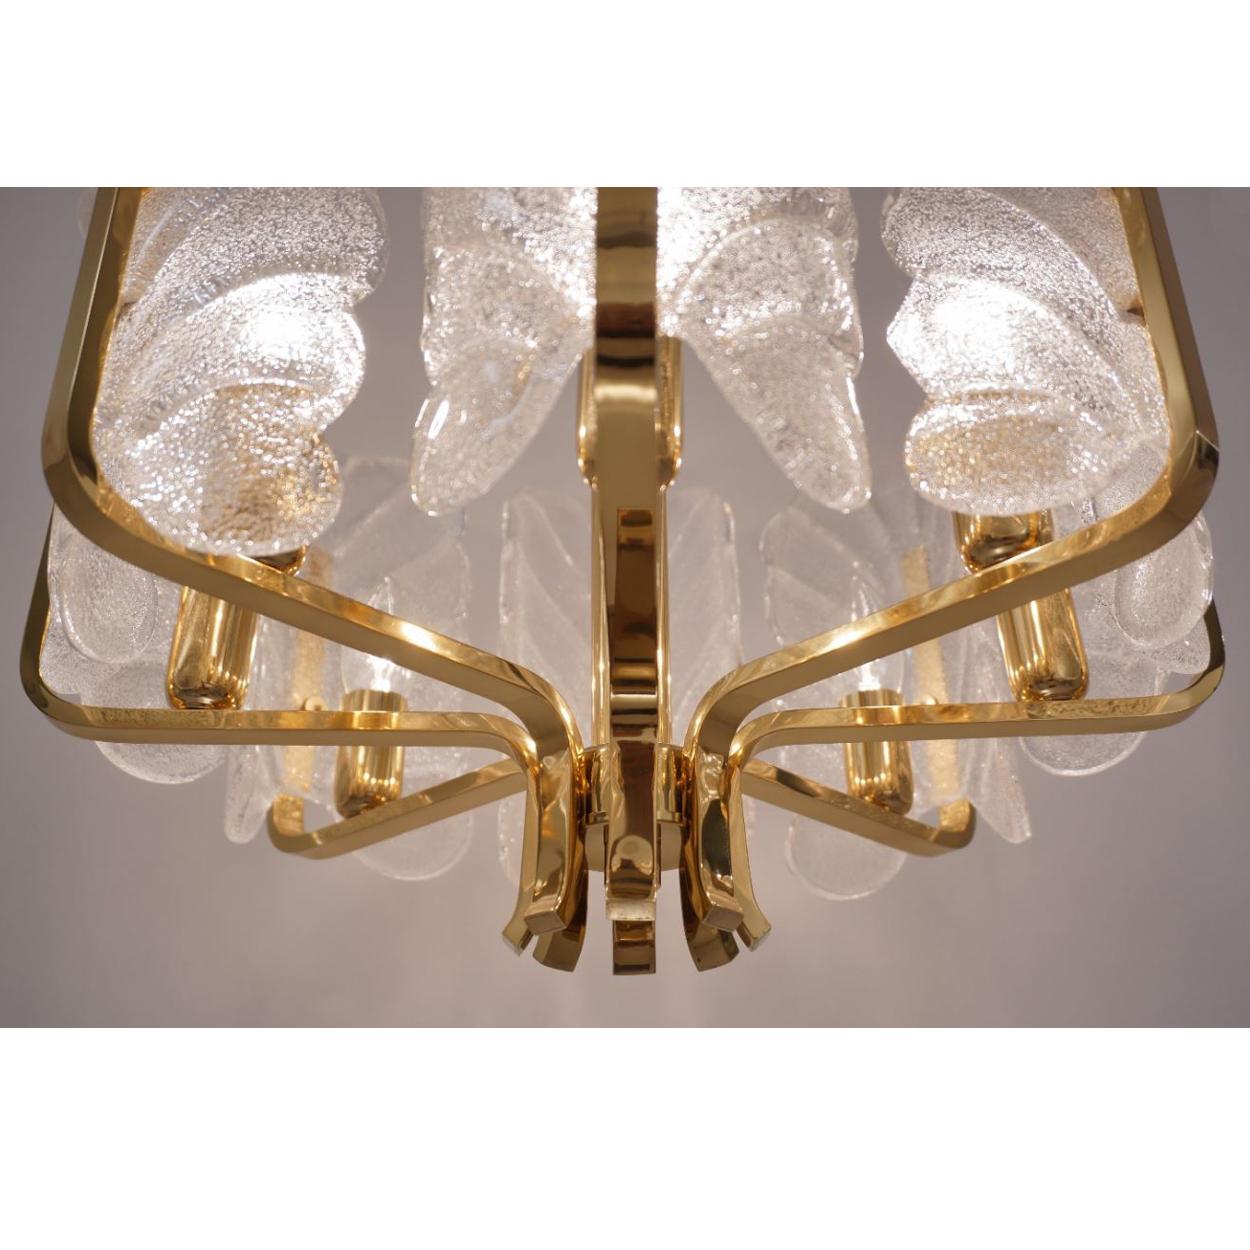 One of the Six Large Fagerlund Glass Leaves Brass Chandelier by Orrefors, 1960s For Sale 4